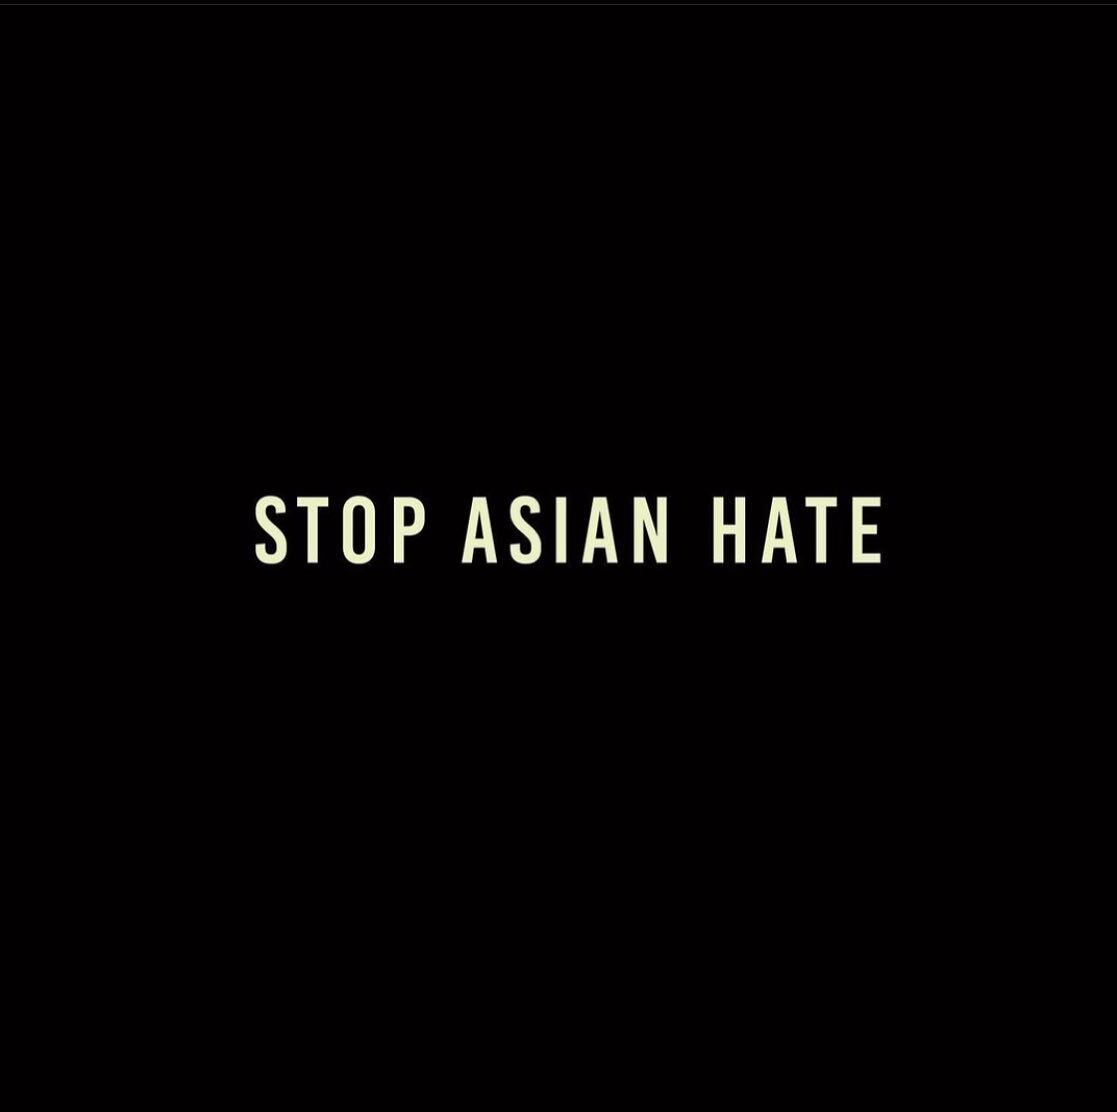 We have infinite stamina to fight for what is right  #stopasianhate